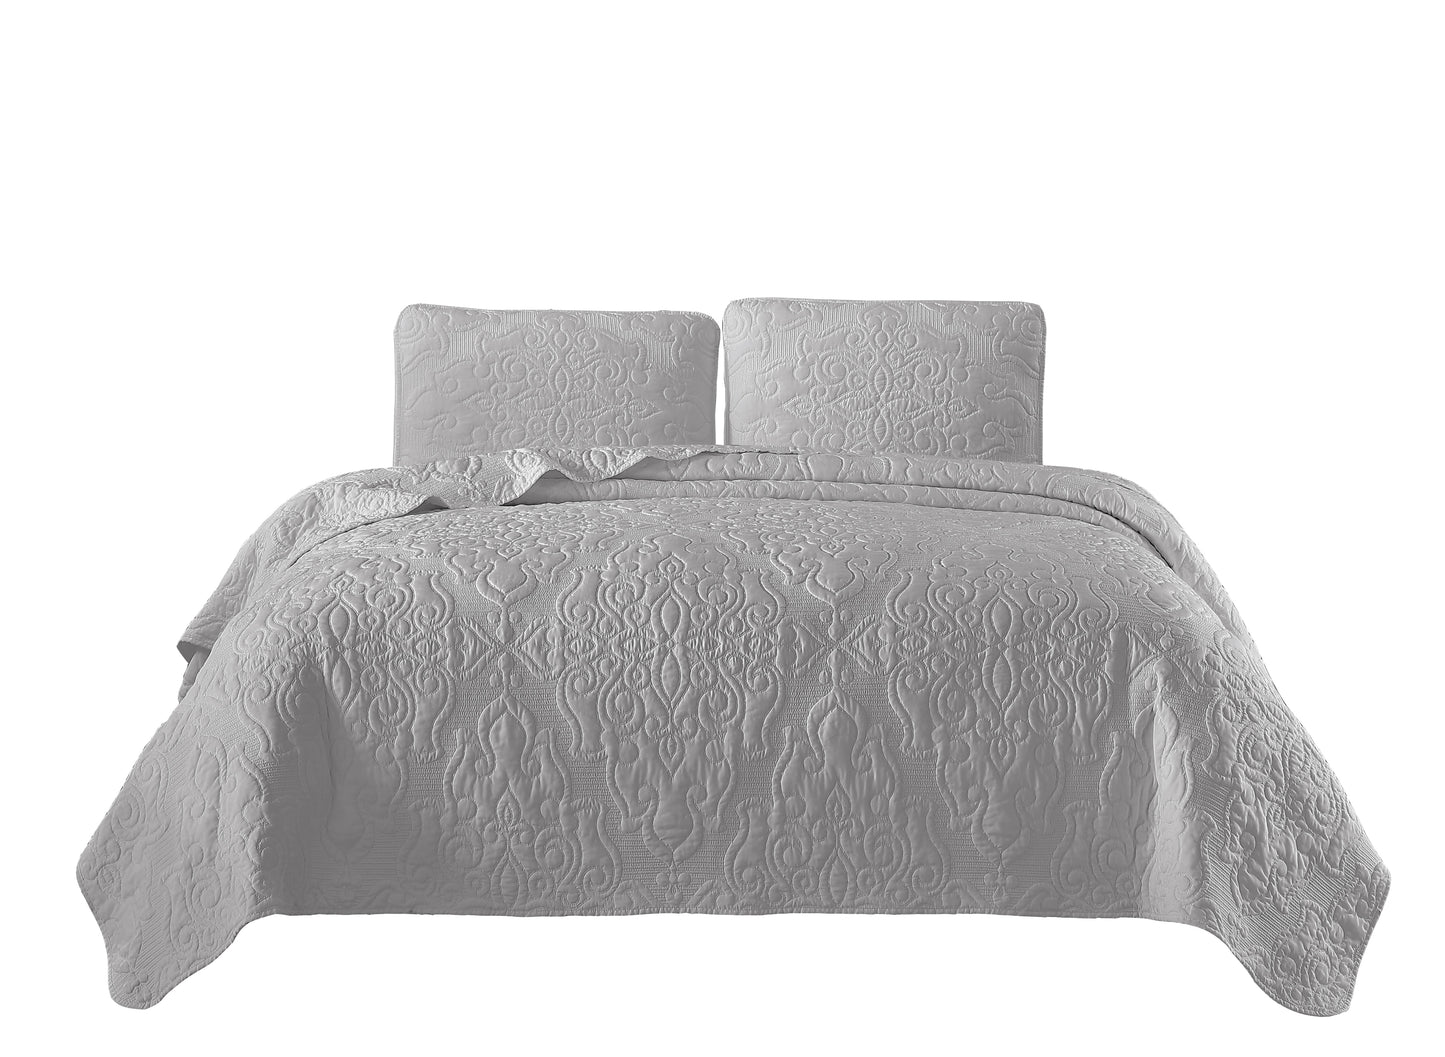 Frederick 3-Piece Bamboo Fiber Medallion Quilted Coverlet Set